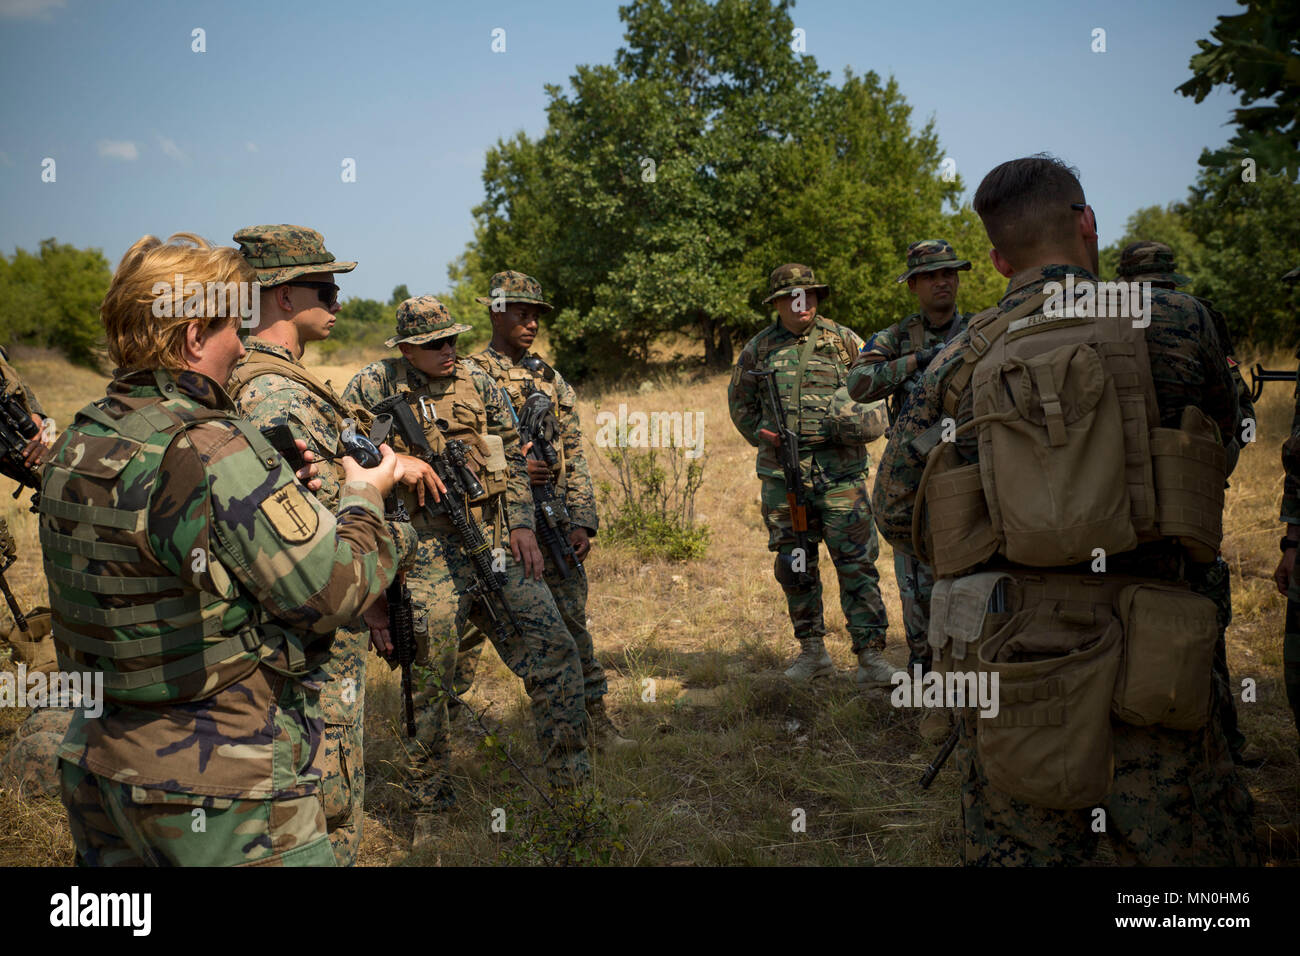 U.S. Marines with Black Sea Rotational Force 17.1 exchange patrolling tactics with Moldovan soldiers during a patrolling field exercise aboard Novo Selo Training Area, Bulgaria, Aug. 6, 2017. The event was part of Exercise Platinum Lion 17.2, an exercise designed to build interoperability between NATO Allies and partner nations. (U.S. Marine Corps photo by Cpl. Victoria Ross) Stock Photo